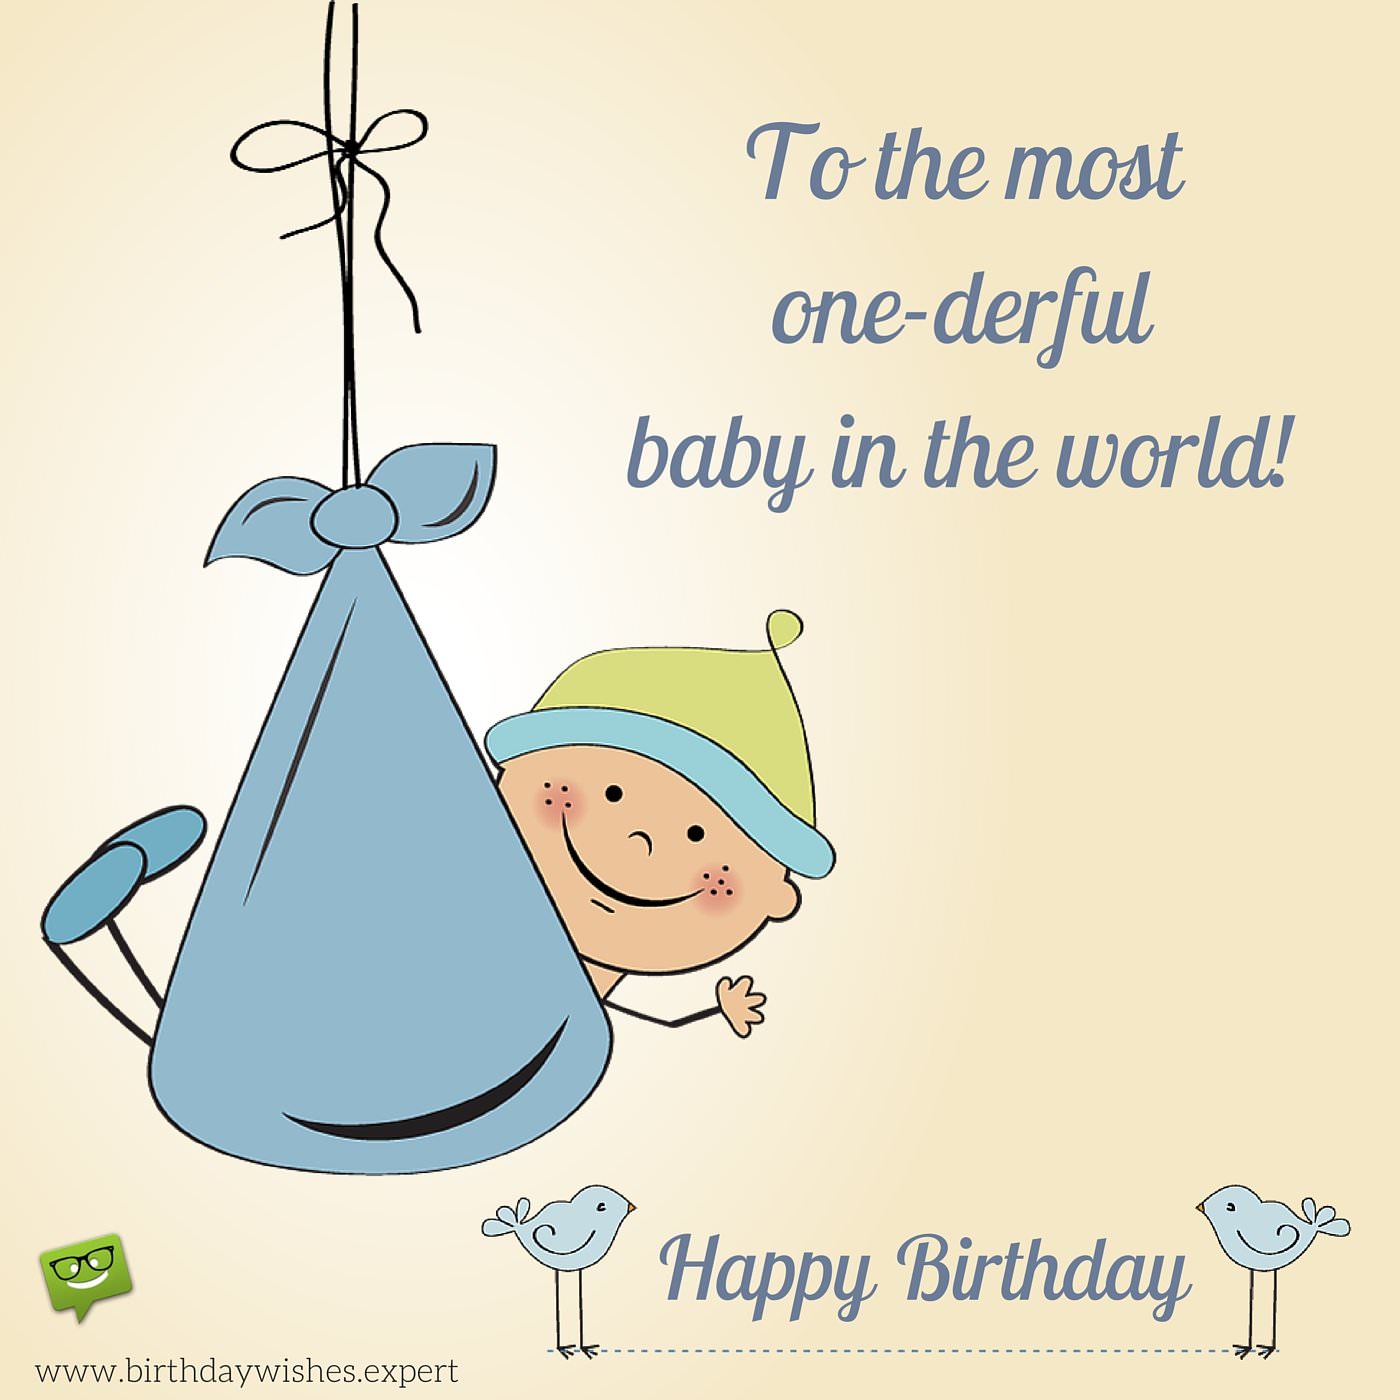 Birthday Wishes for Babies | A Child's First Years in Life